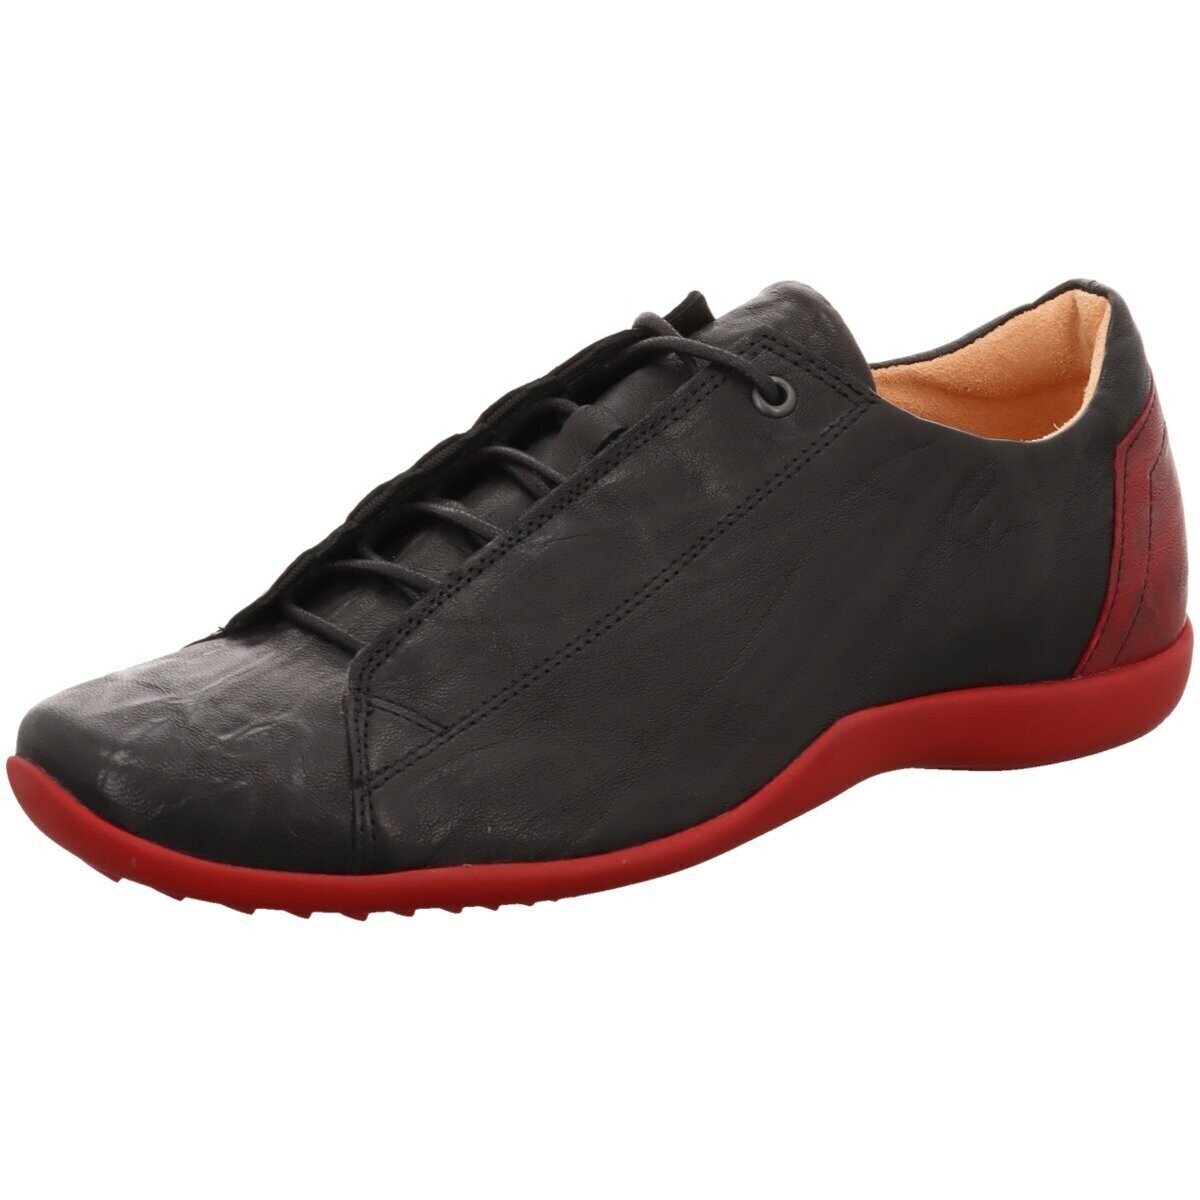 Chaussures Homme Lyle And Scott Think  Noir